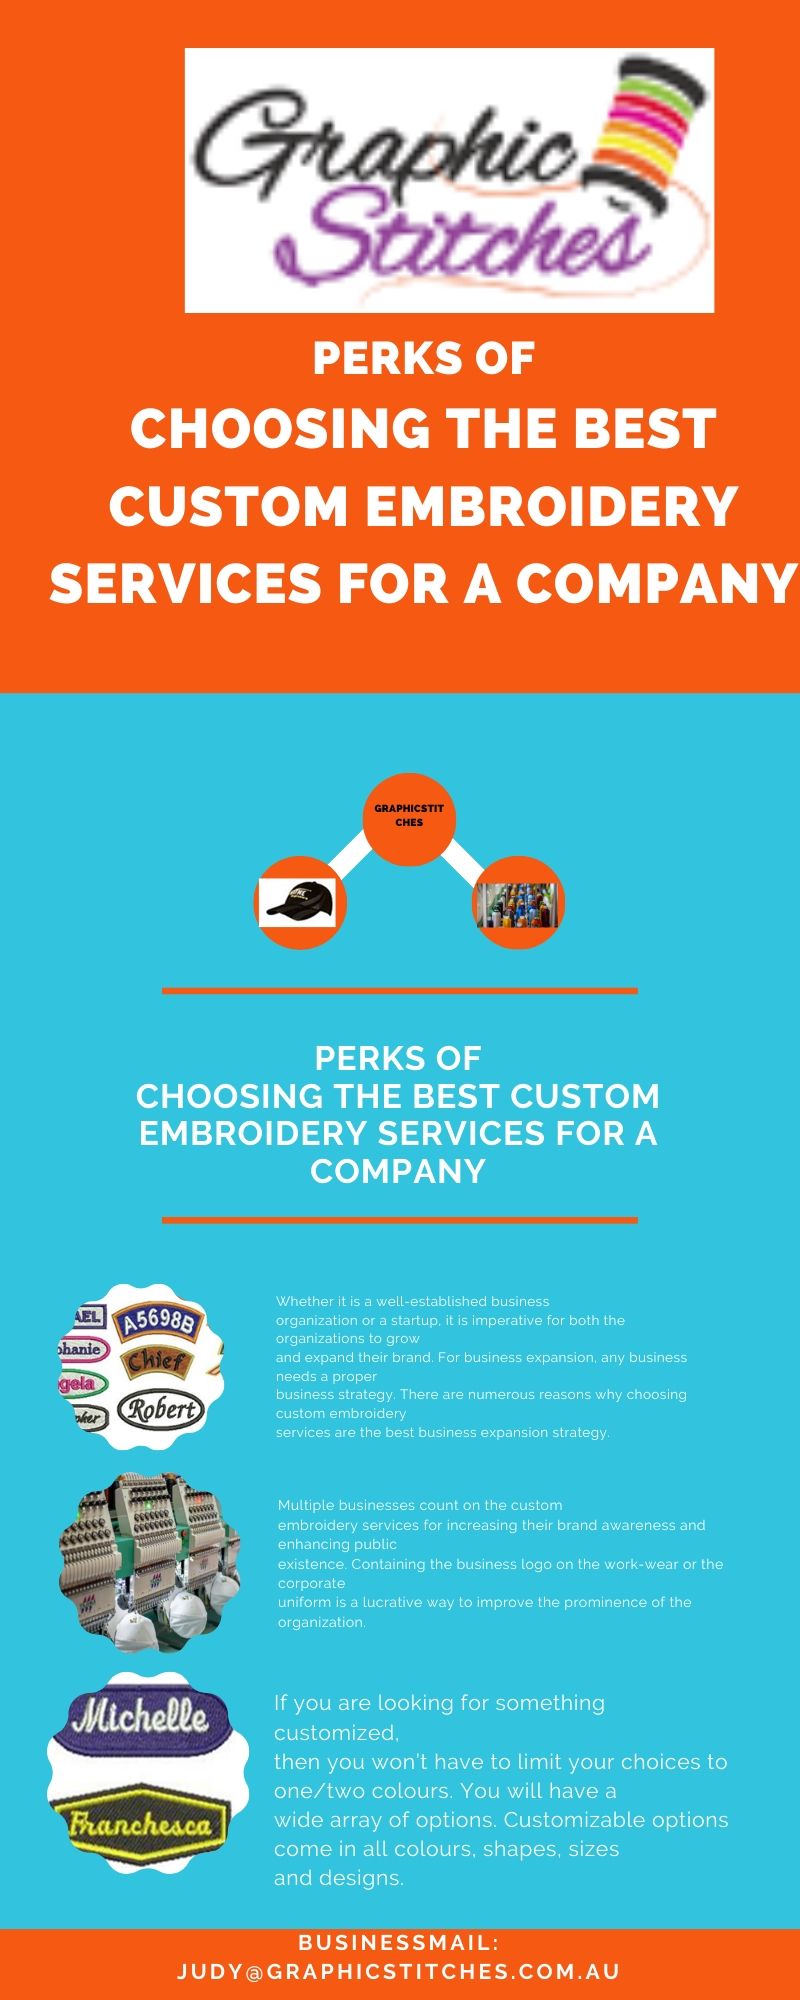 Perks of choosing the best custom embroidery services for a company.jpg  by Graphicstitch